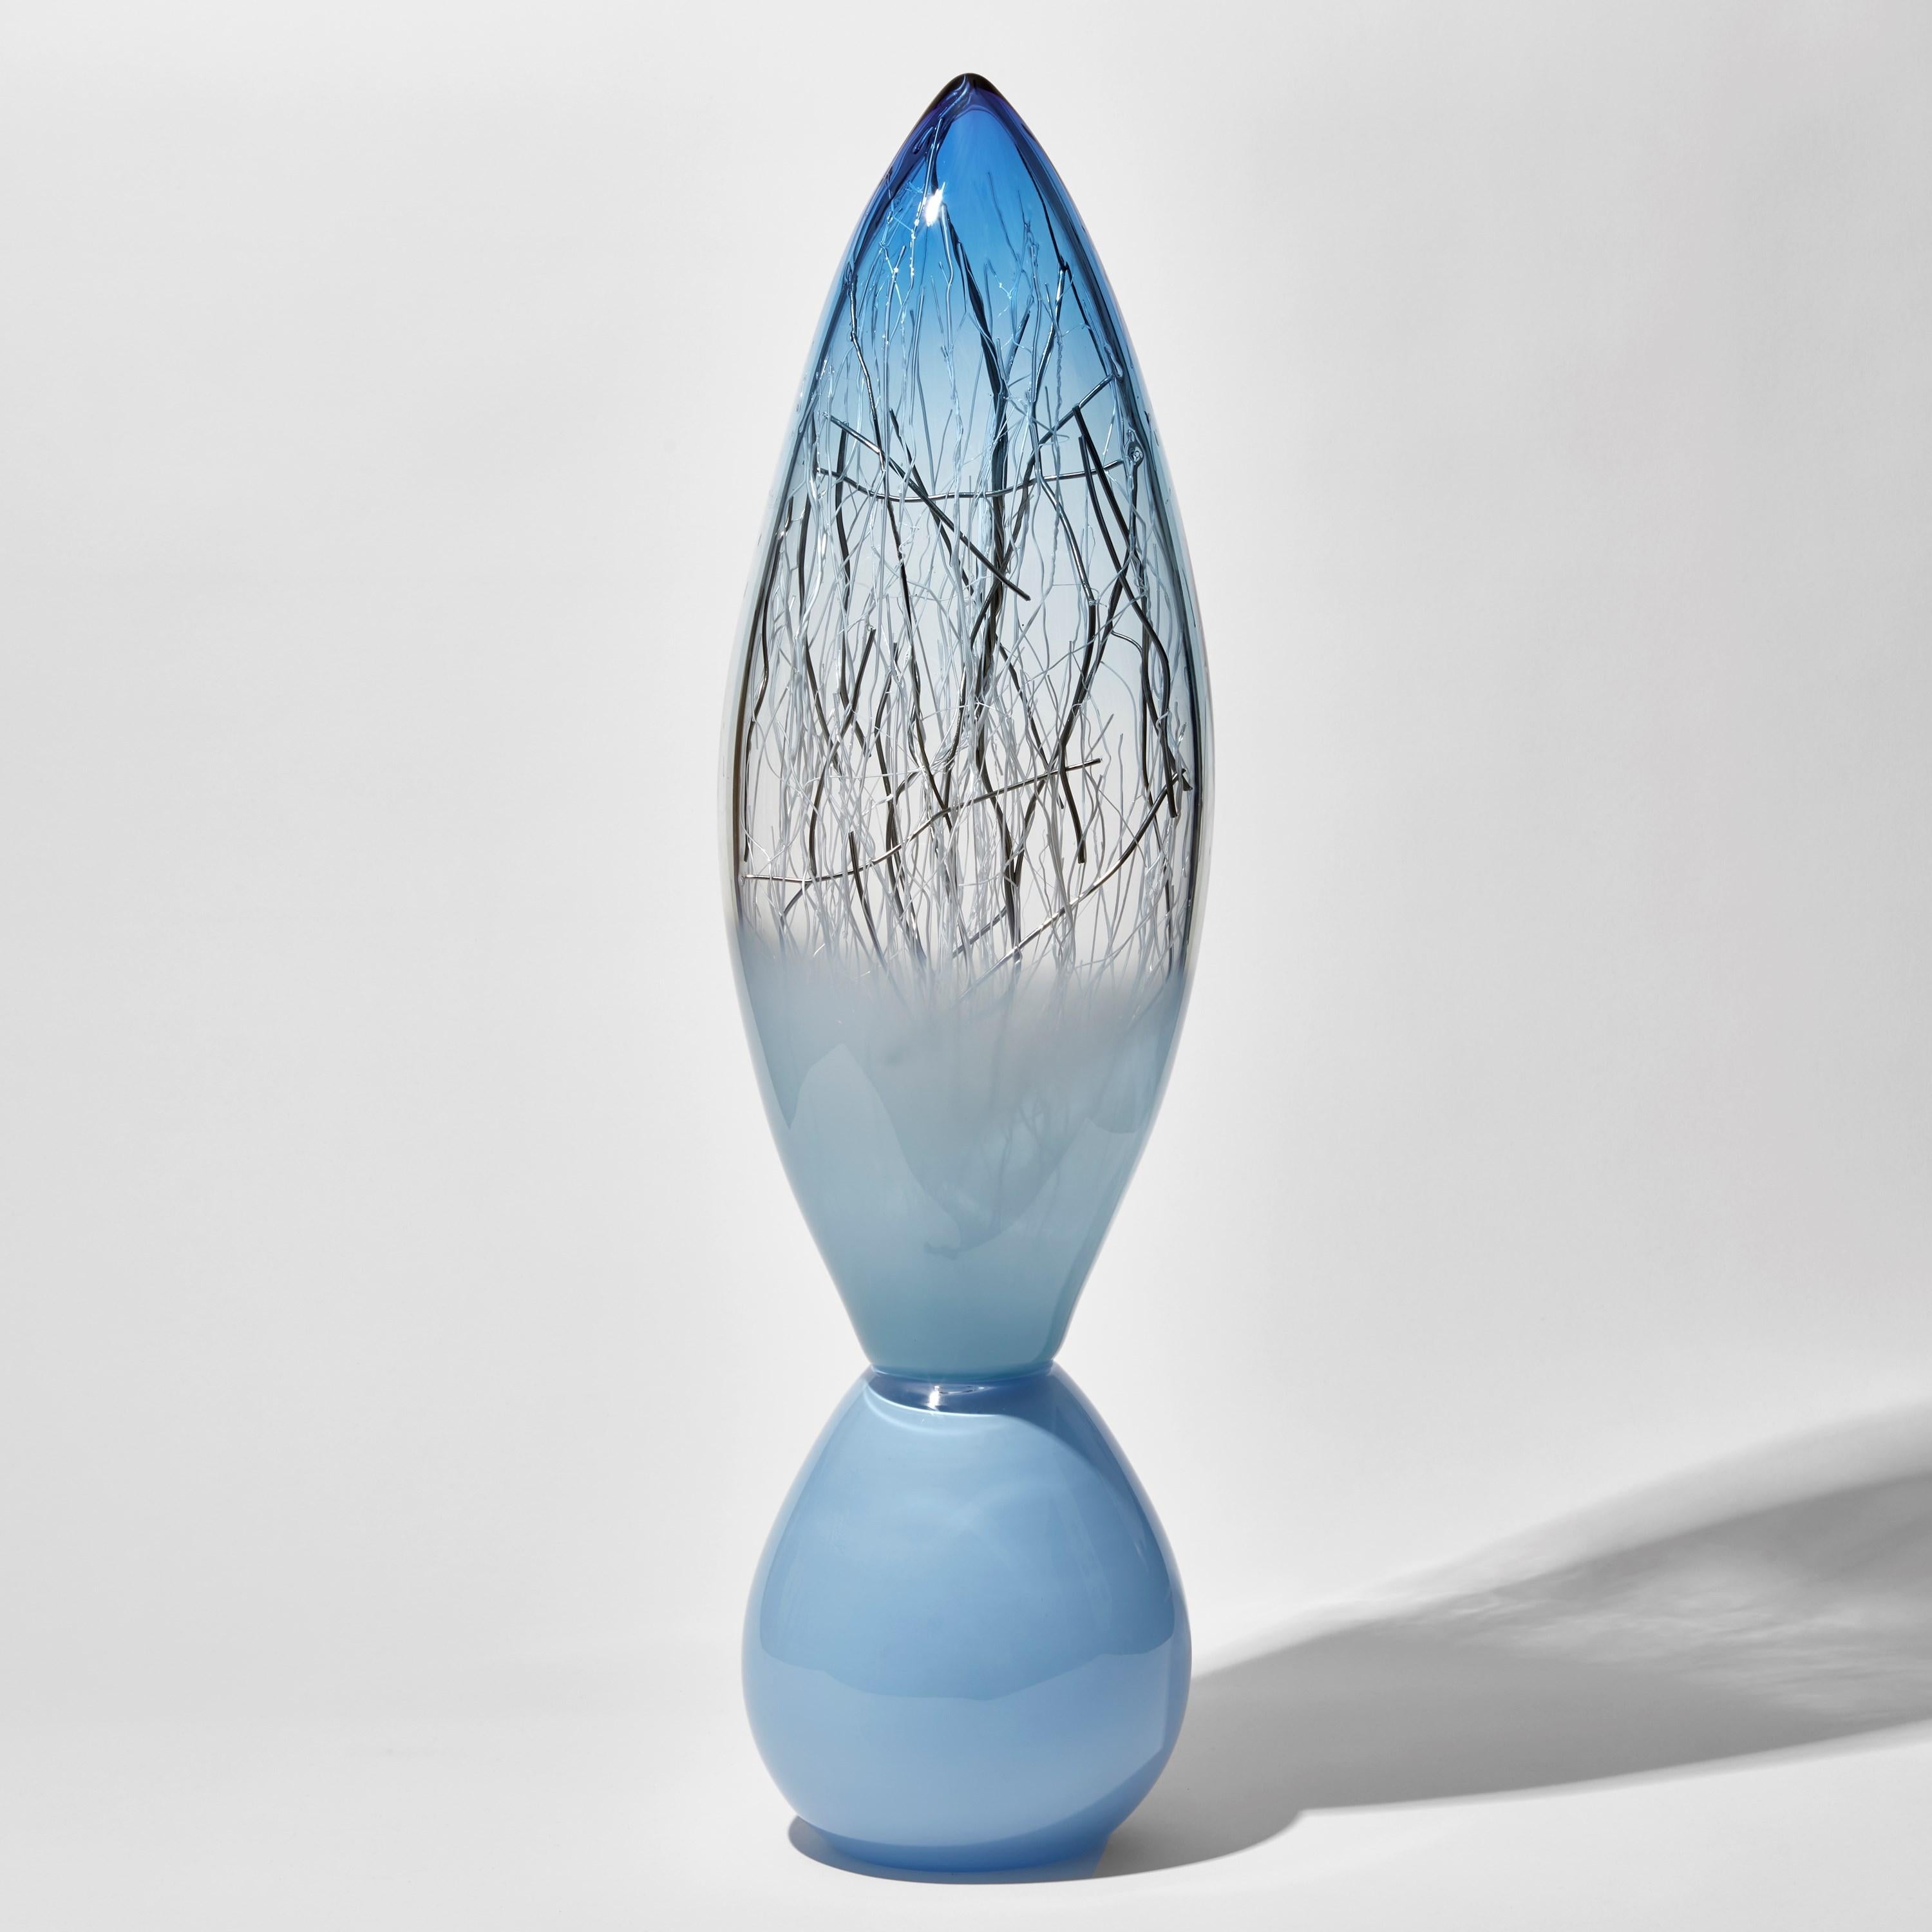 'Ore Totem in Aquamarine & Pale Turquoise with Platinum' is a unique glass sculpture by the collaborative artists Hanne Enemark (Danish) and Louis Thompson (British). The outer glass form contains a multitude of fine white canes of glass, some of